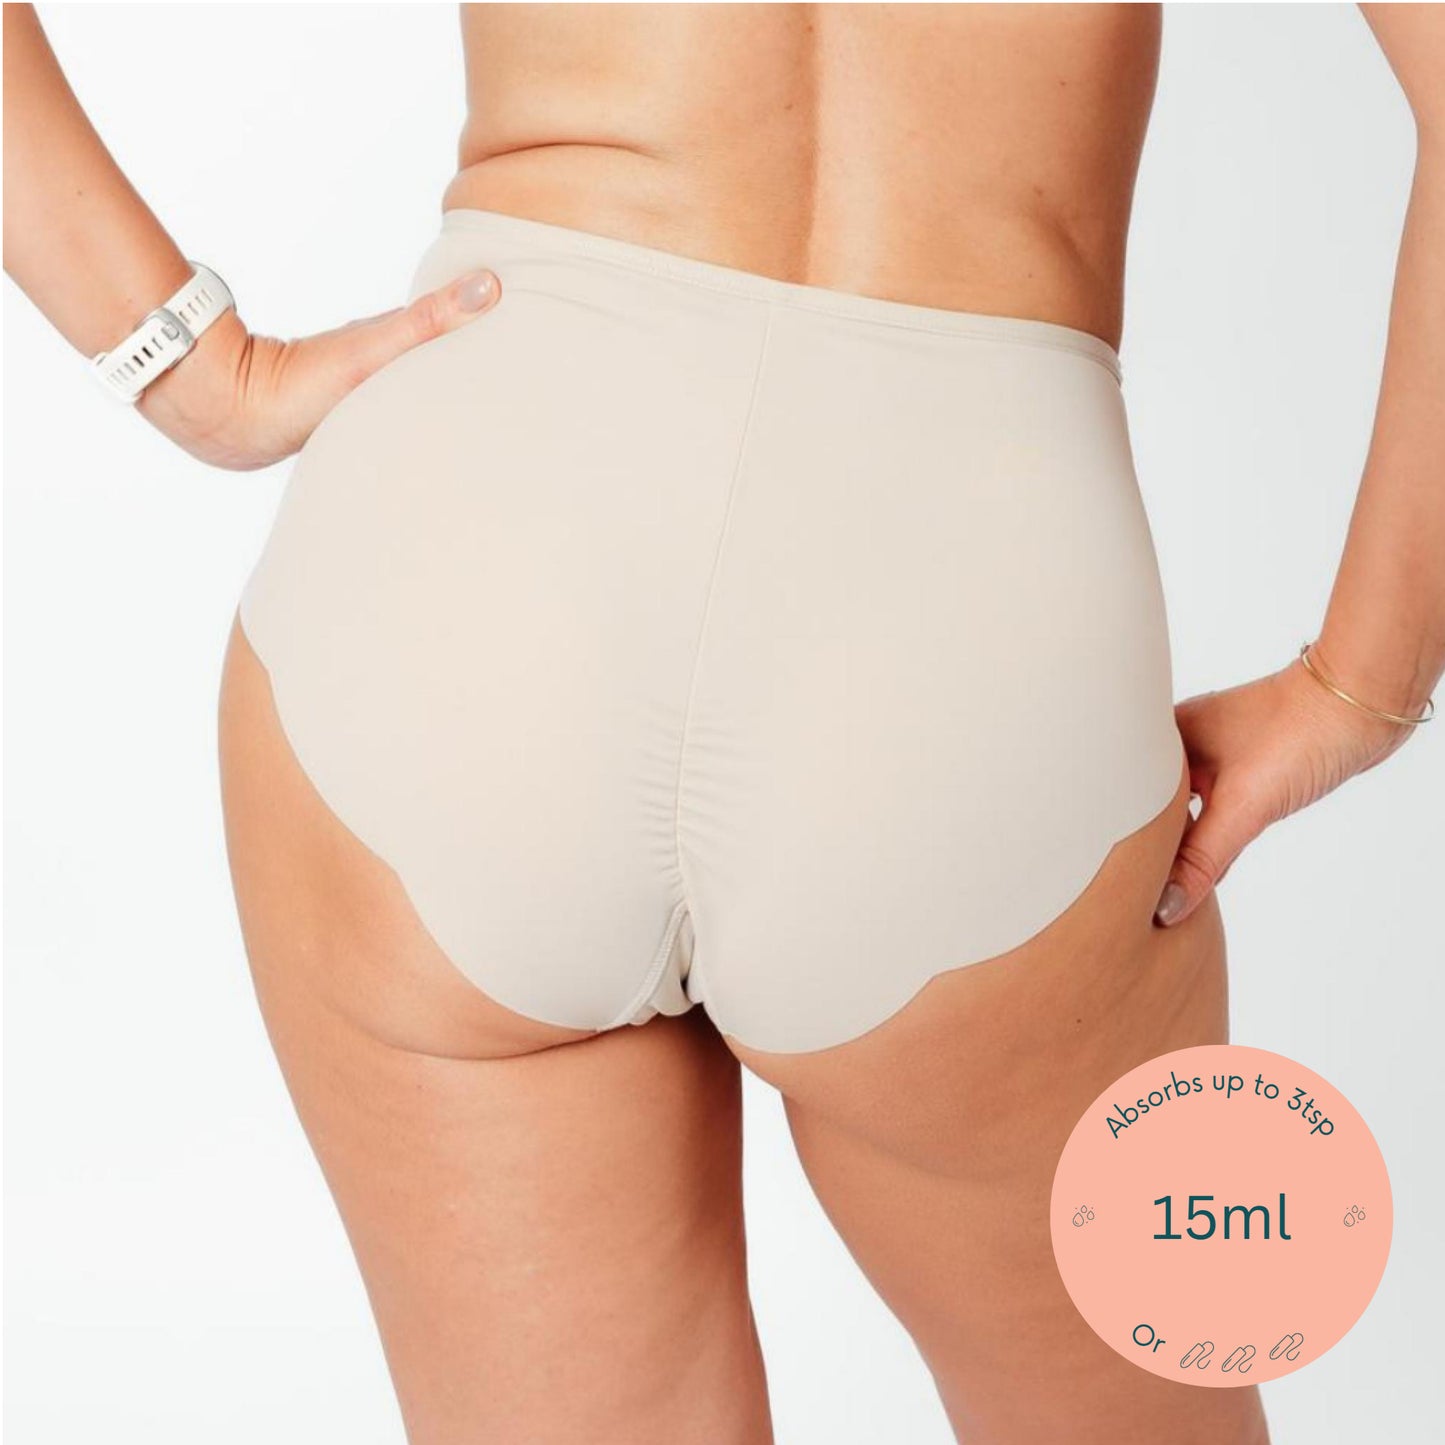 womens knickers shorts period pants m&s yellow knickers rubber knickers  thermal knickers crotchless outfits slimming knickers suspender knickers  different types of knickers maternity support knickers : :  Fashion